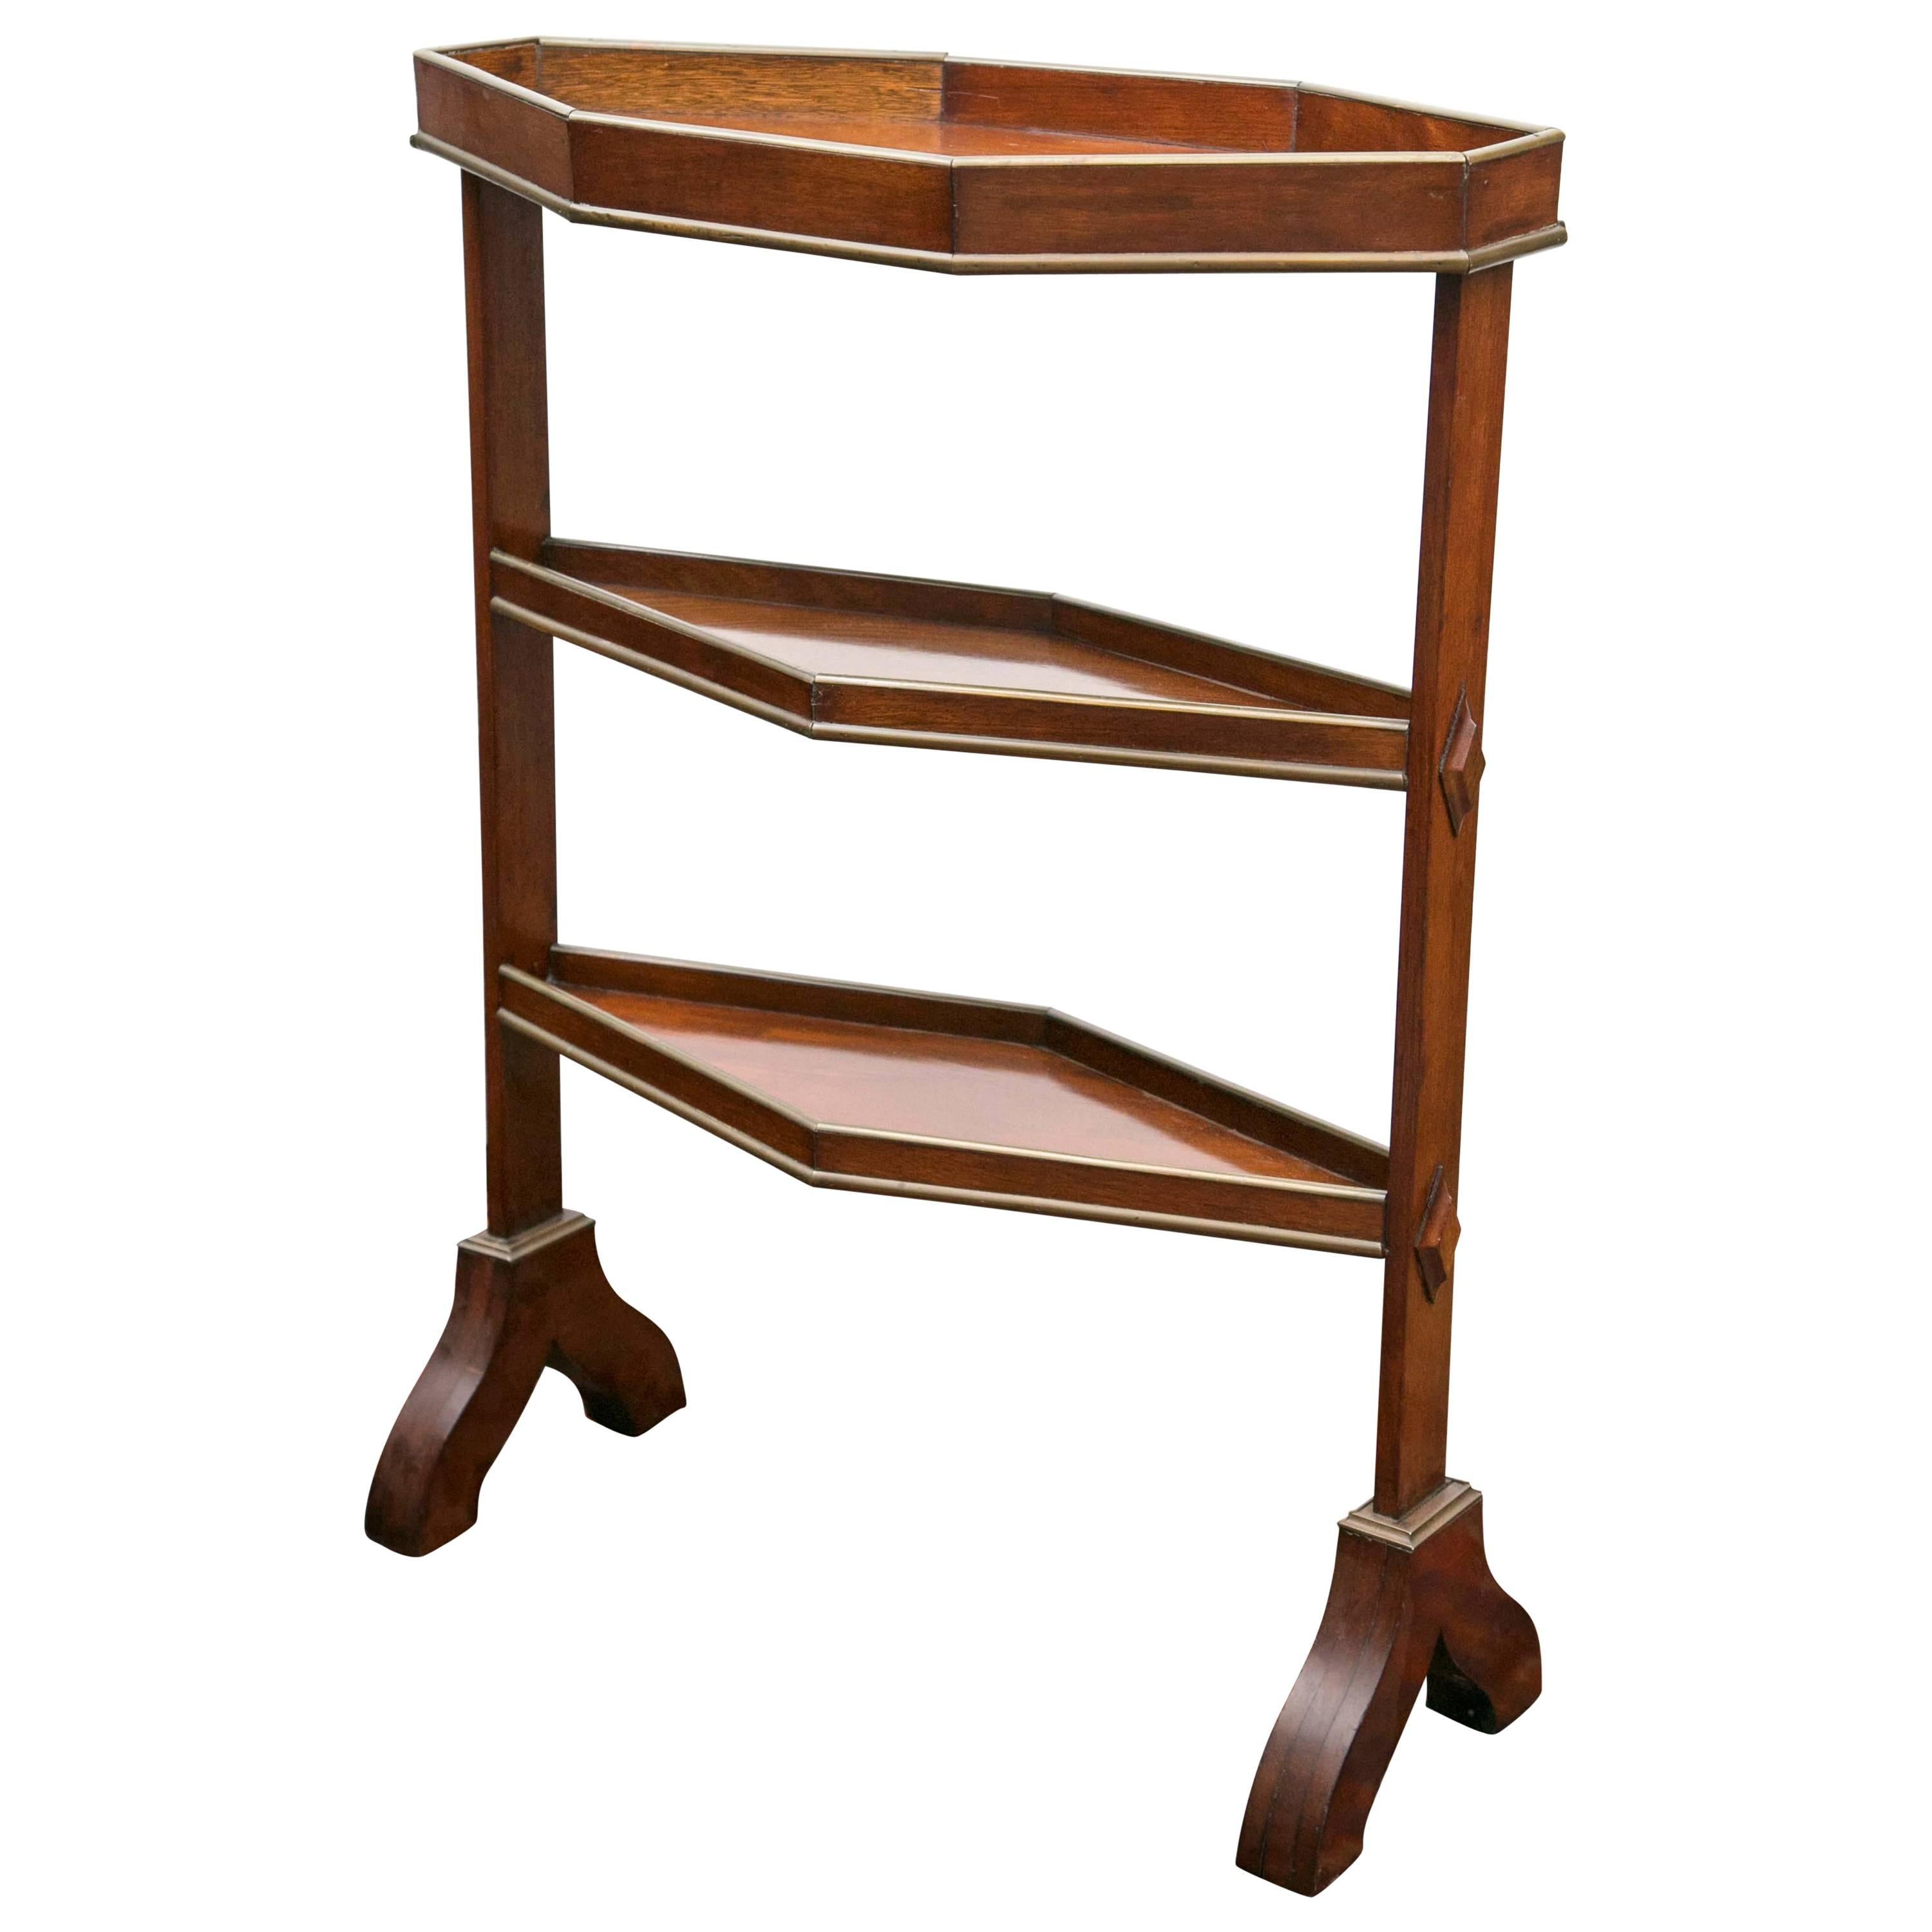 Late Georgian Period Mahogany and Brass Trimmed Etagere Table